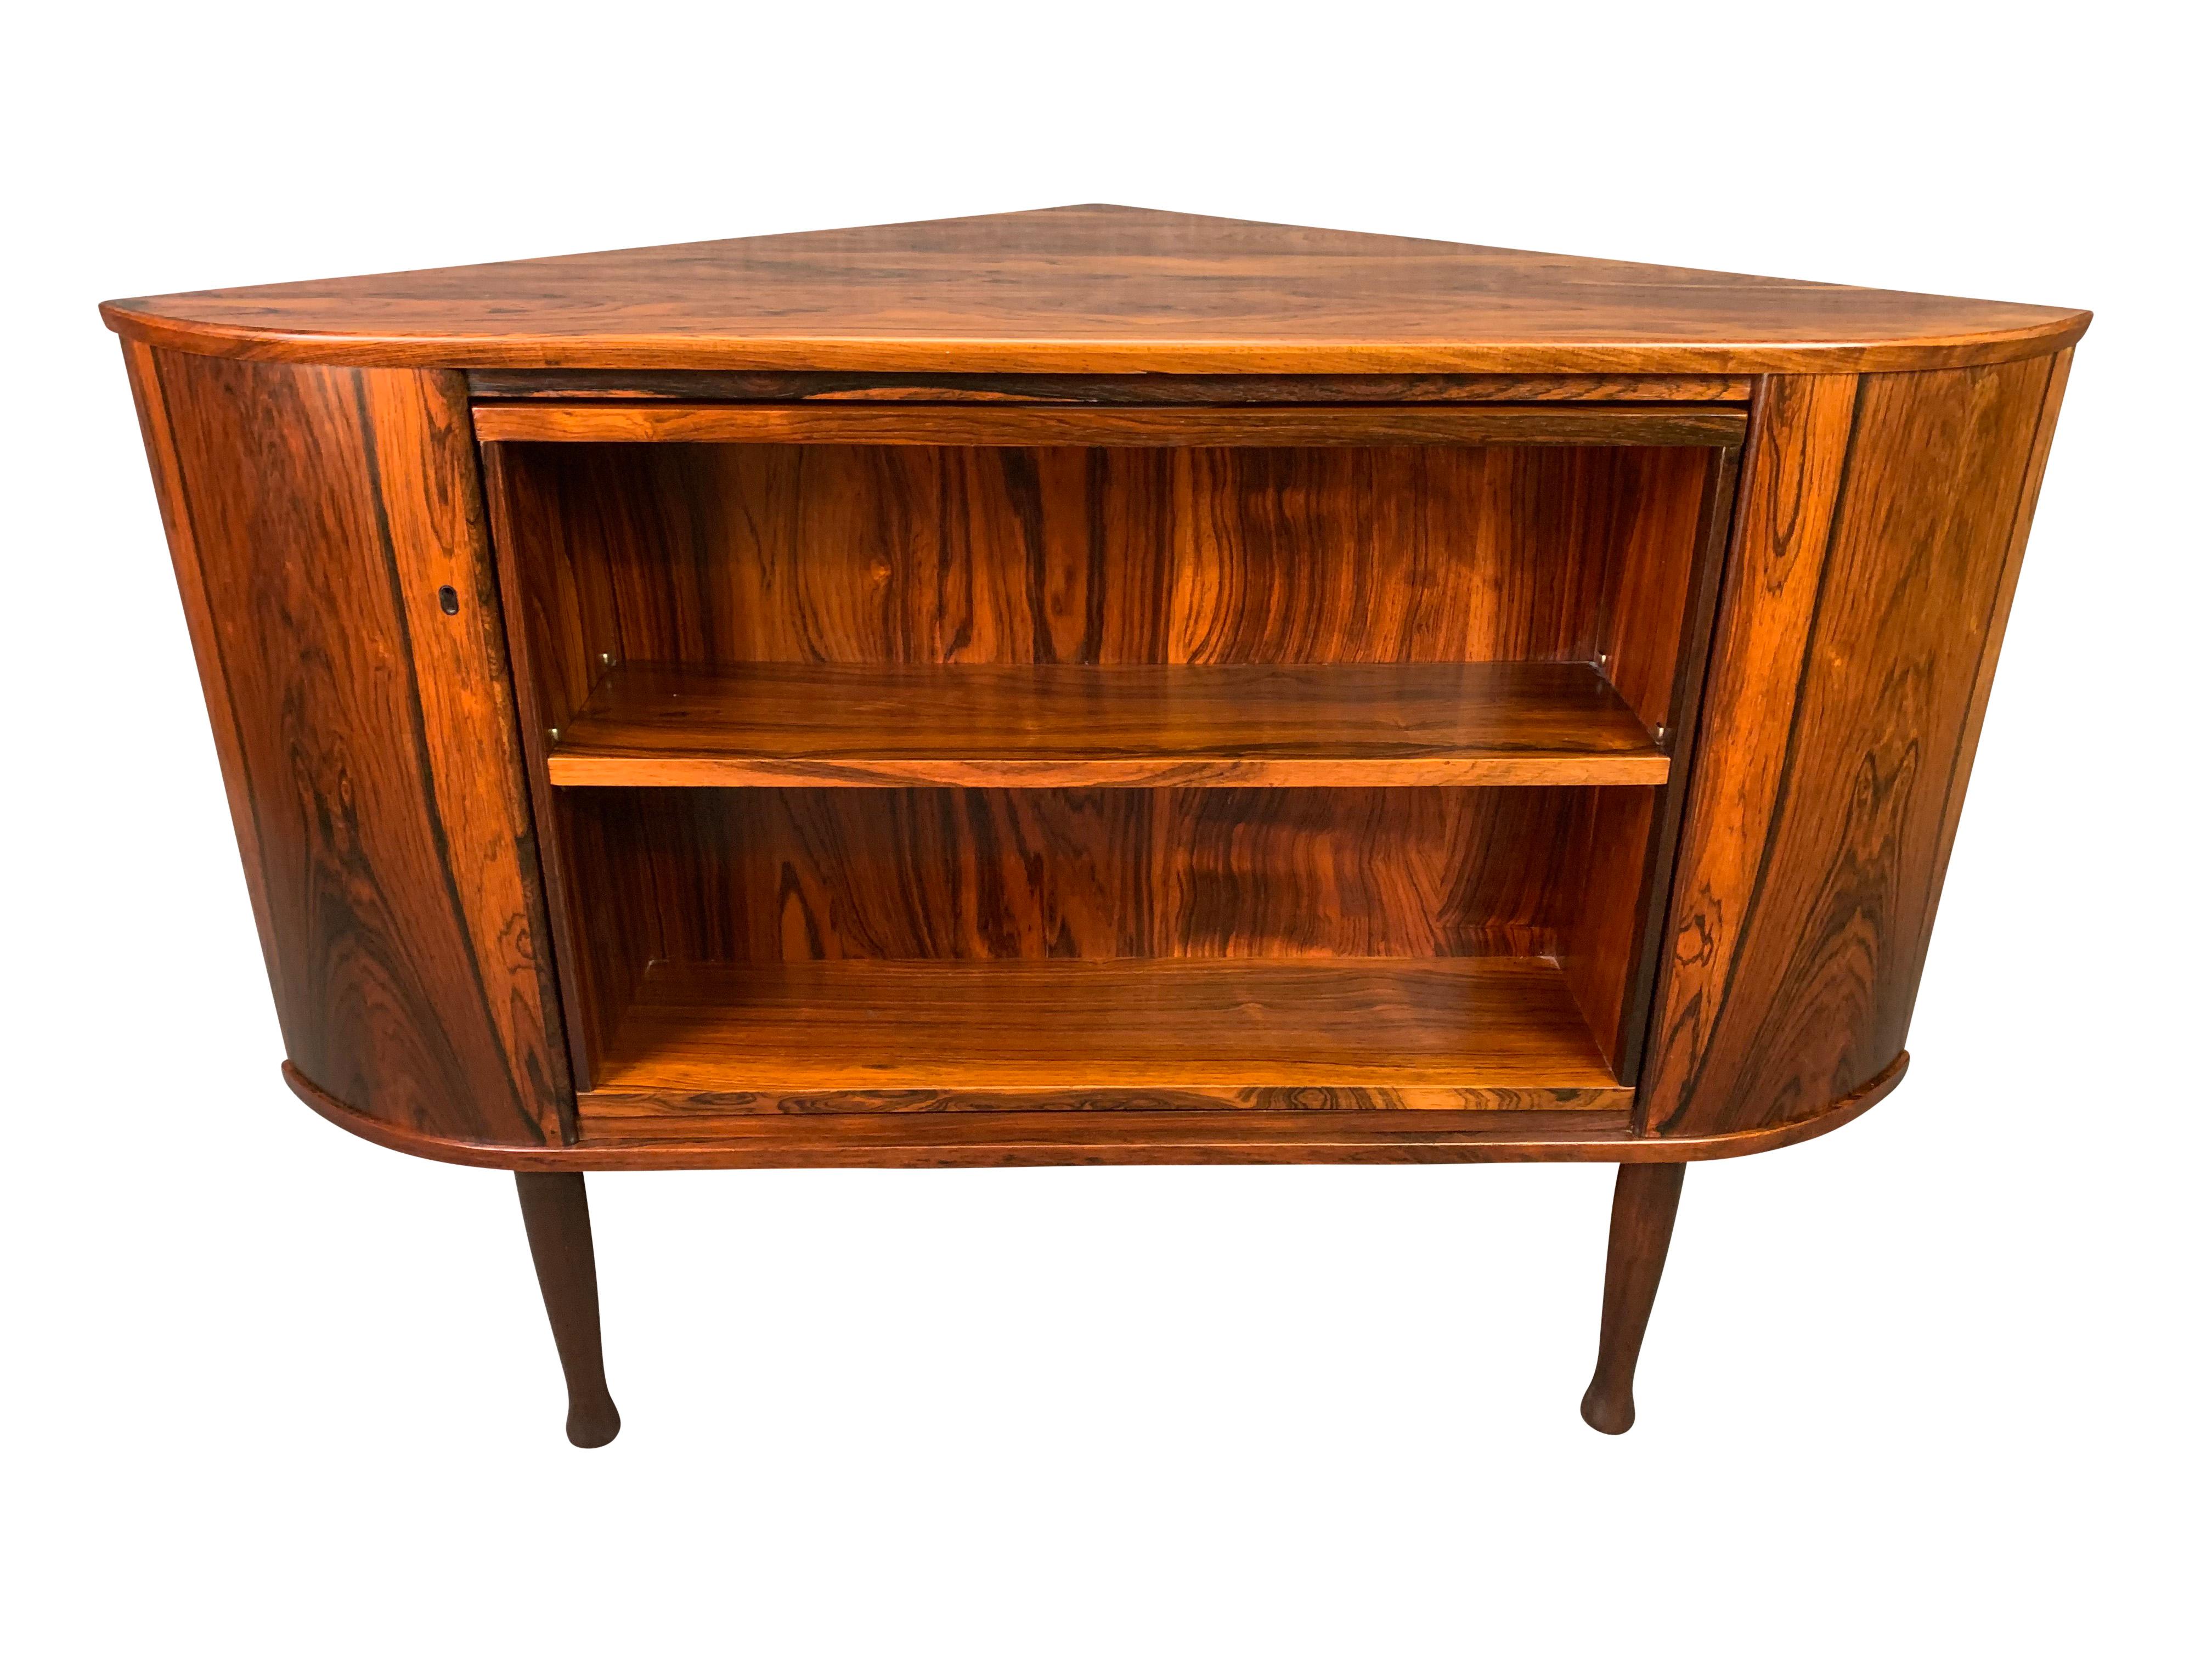 Here is an exceptional 1960s Scandinavian Modern corner cabinet in rosewood featuring a rotating inside with a dry bar and display case sides. This special piece features a vibrant grain and four sculpted tapered legs.
The bookcase side of the unit